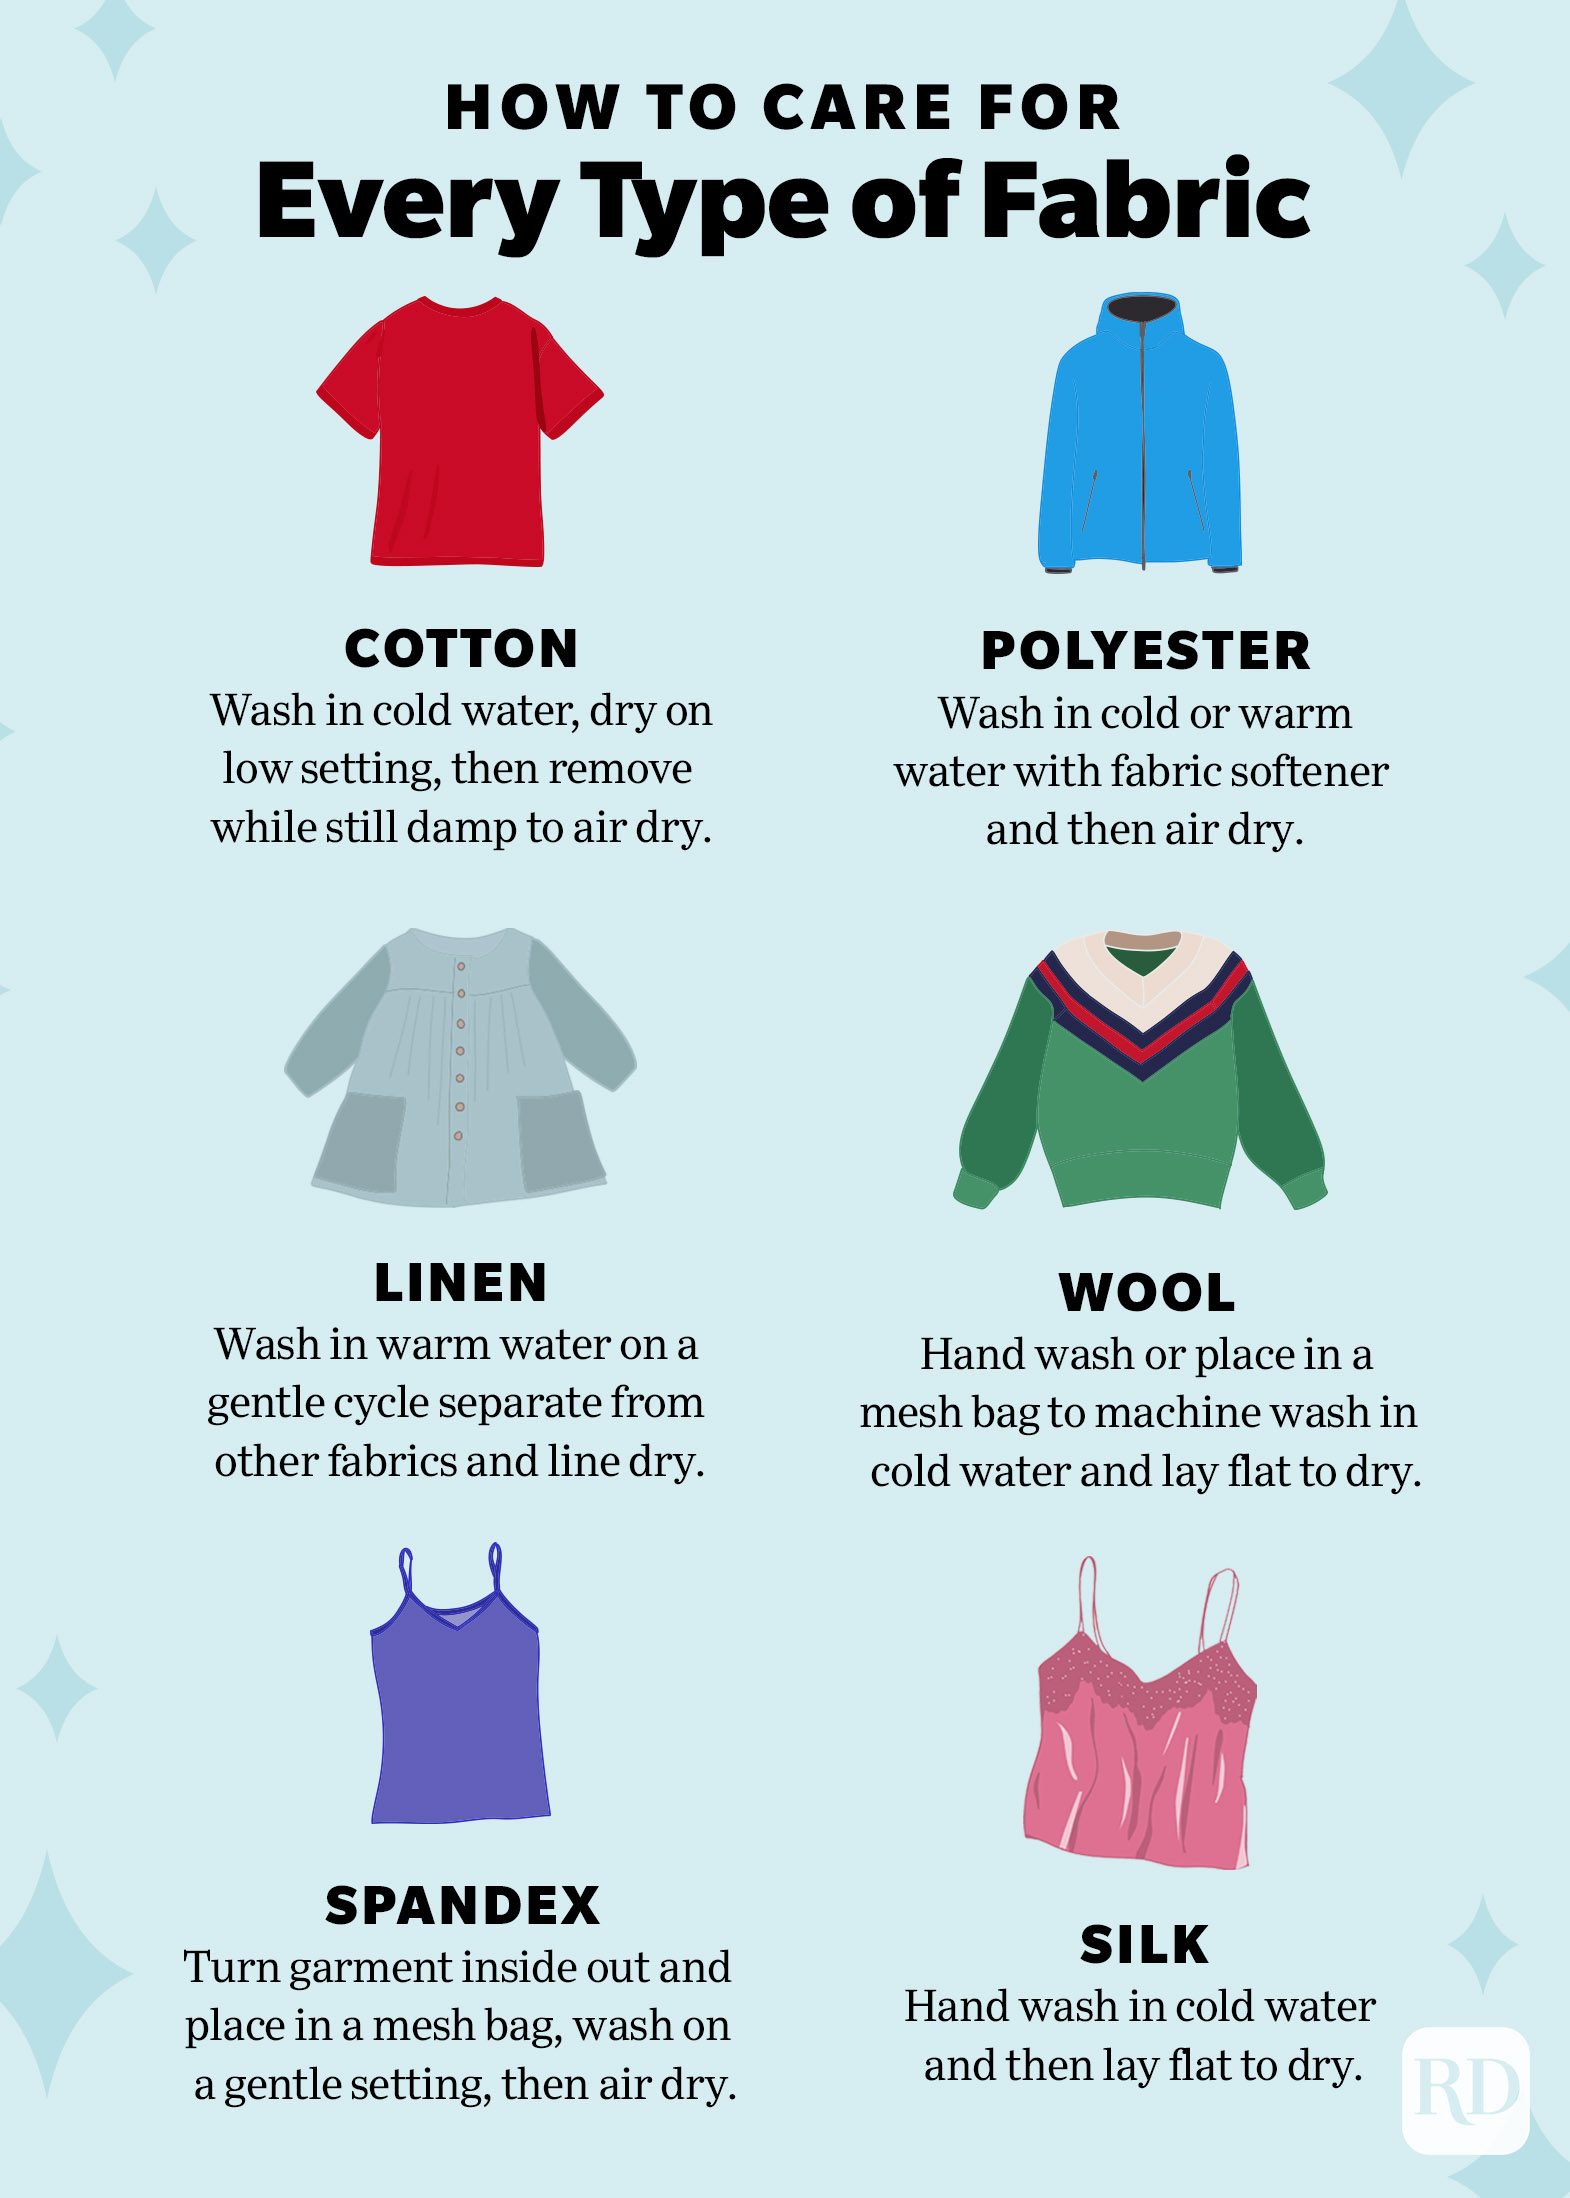 https://www.rd.com/wp-content/uploads/2021/09/how-to-wash-fabrics-graphic-2.jpg?fit=680%2C952